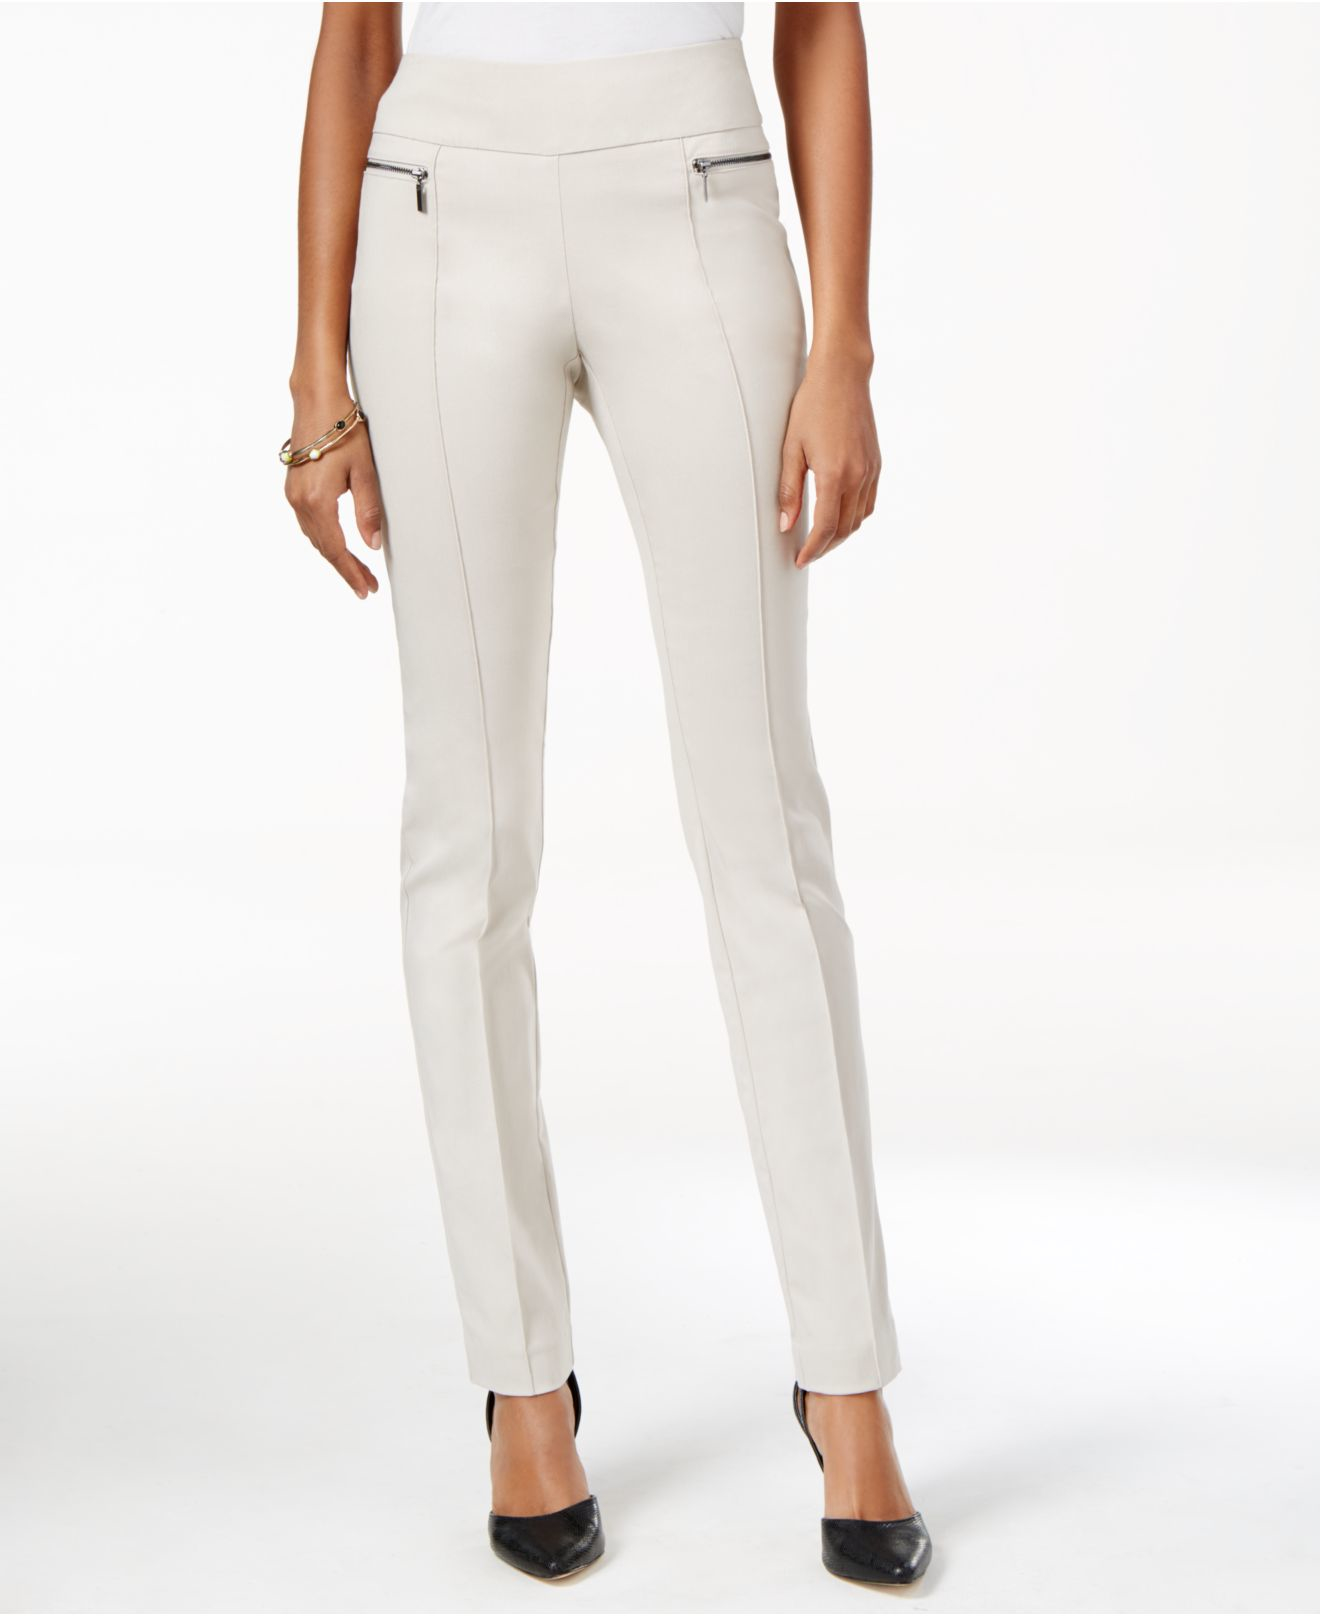 Lyst - Style & co. Skinny Pull-on Pants